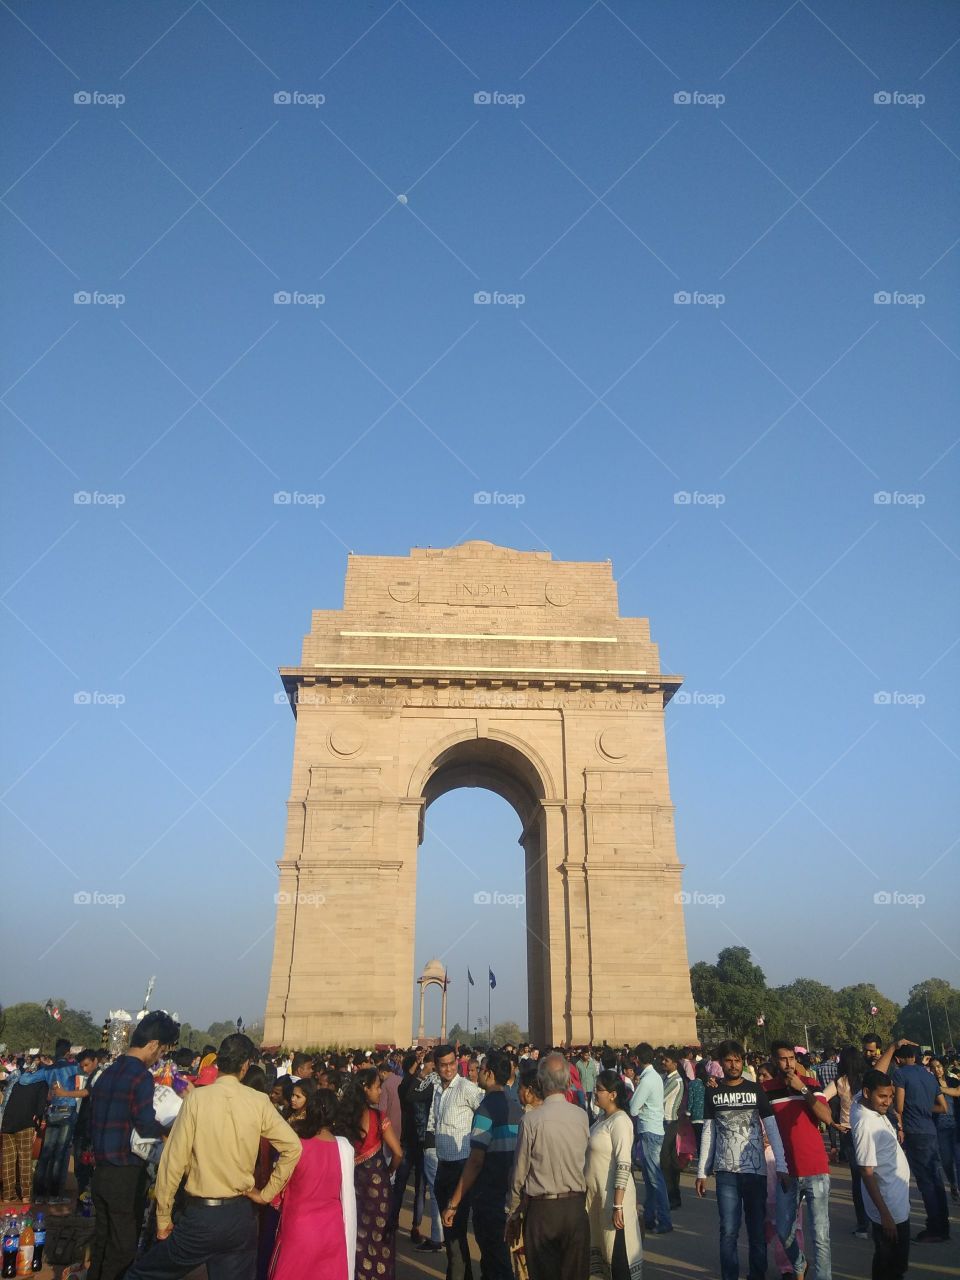 India gate in Delhi India you must visit once in life